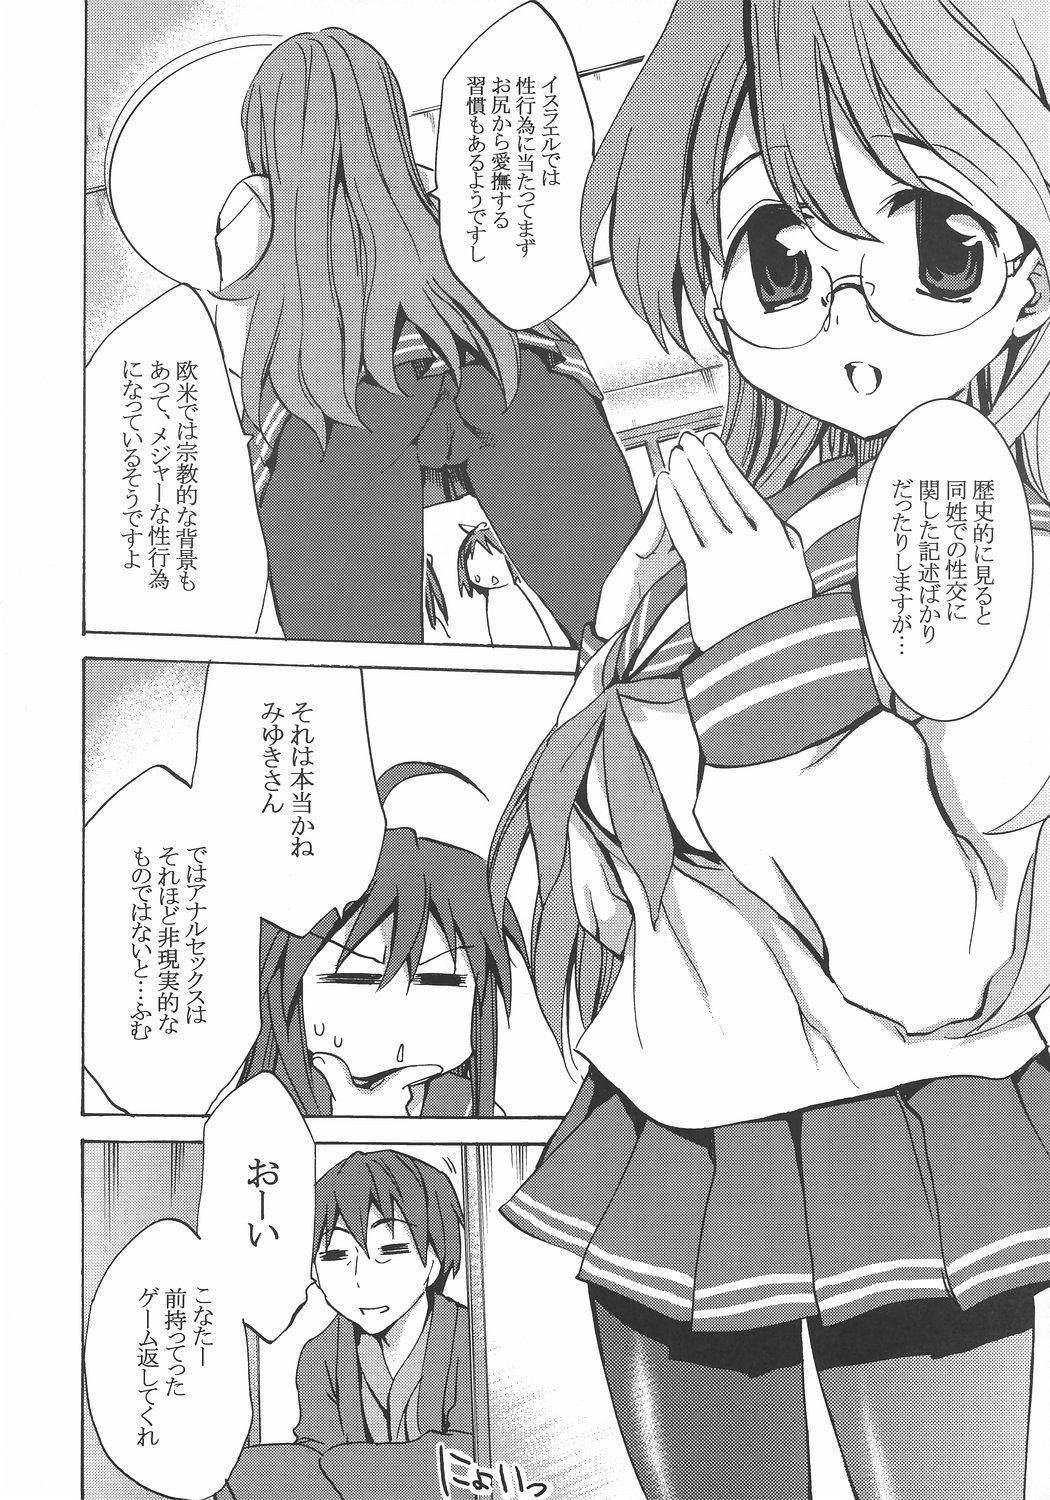 Two Megane, Megane!! - Lucky star Doggie Style Porn - Page 7